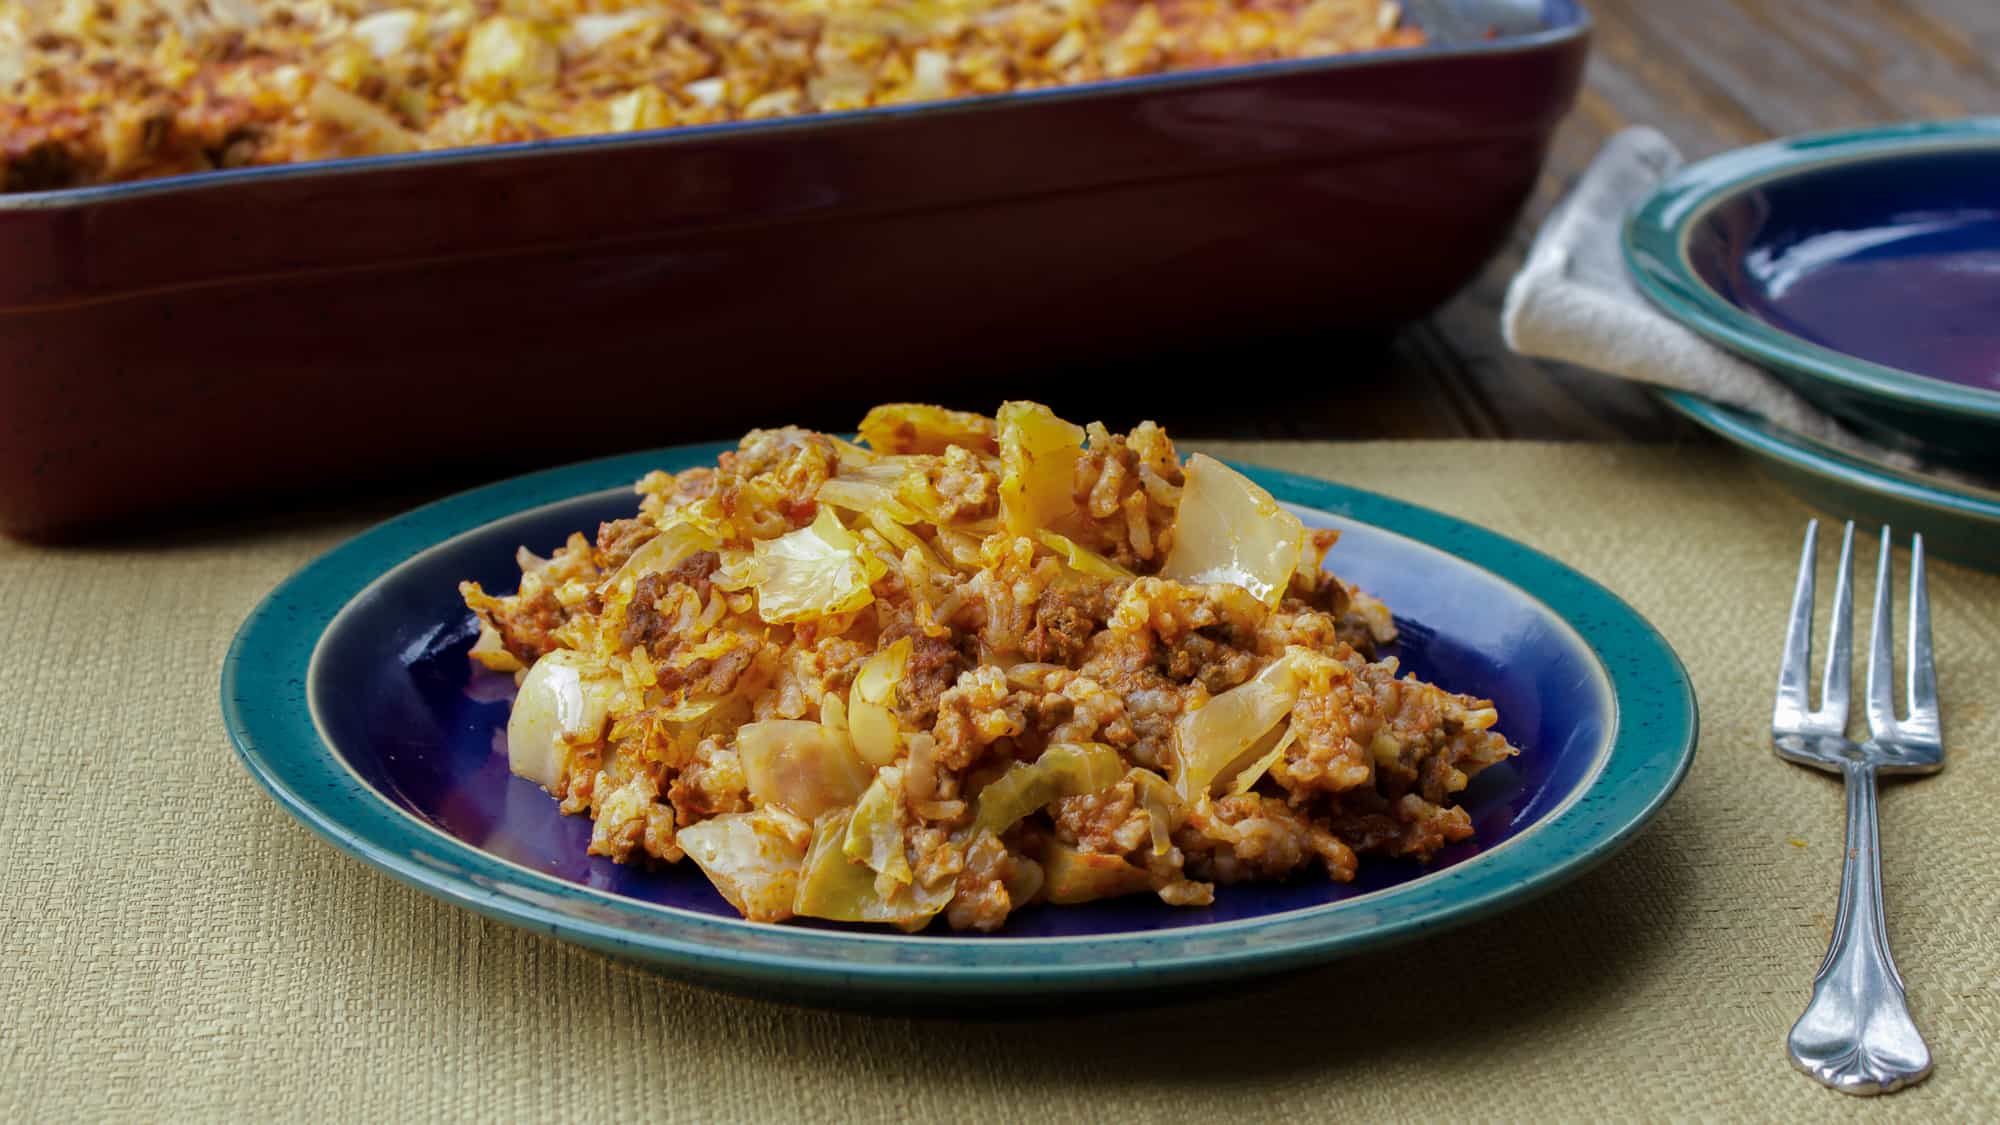 Cabbage Roll Casserole - easy recipe for this one pot meal